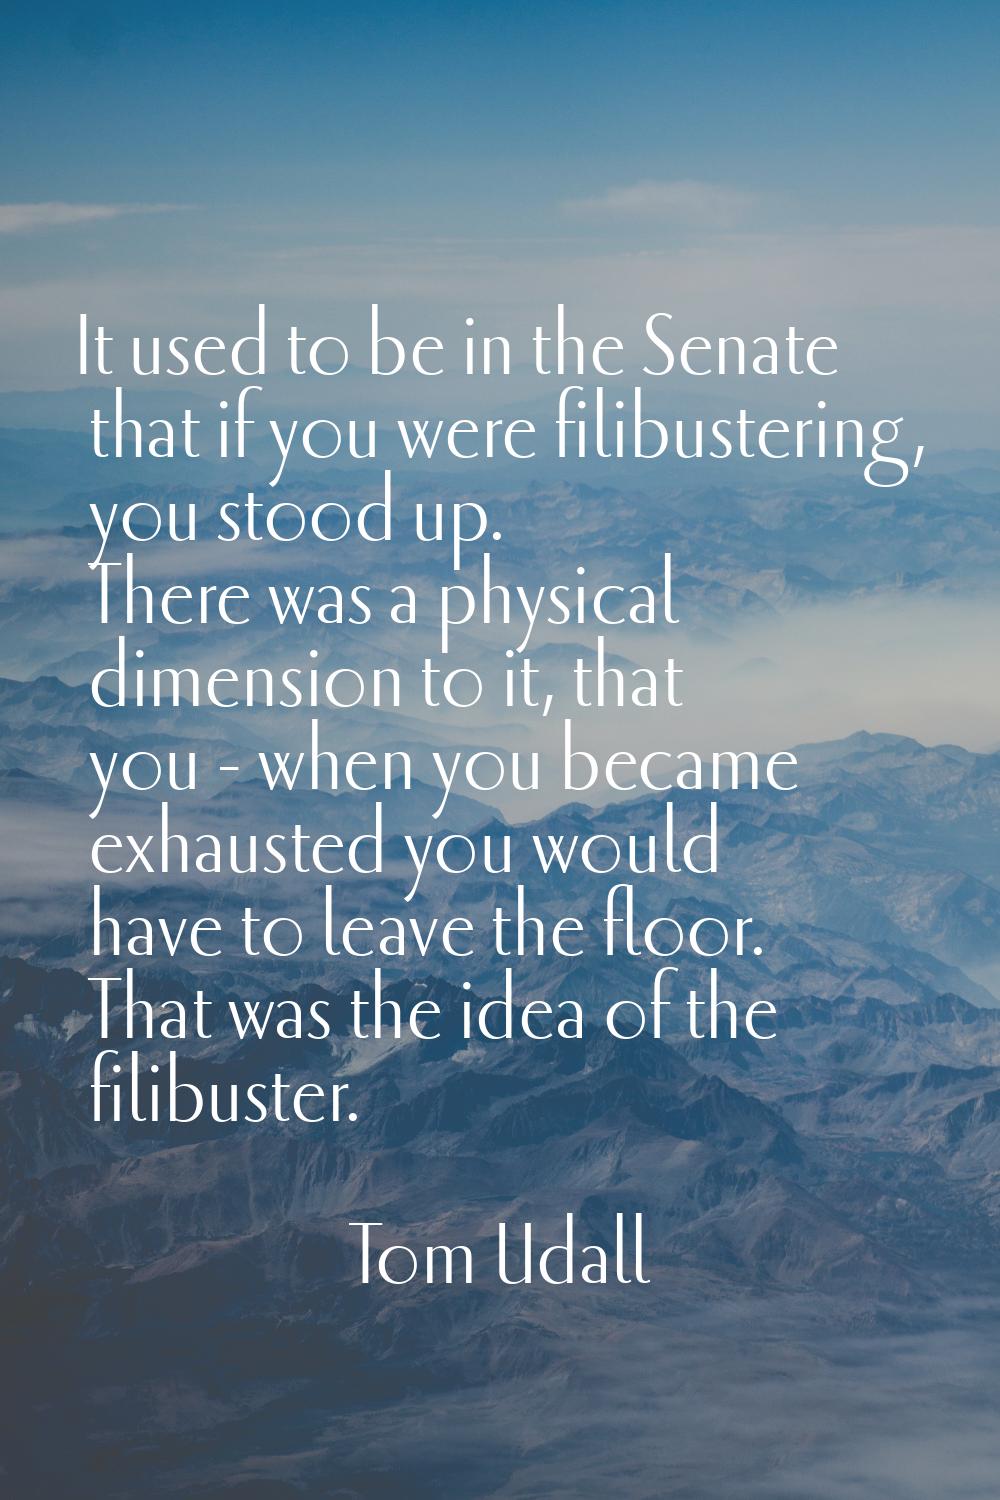 It used to be in the Senate that if you were filibustering, you stood up. There was a physical dime